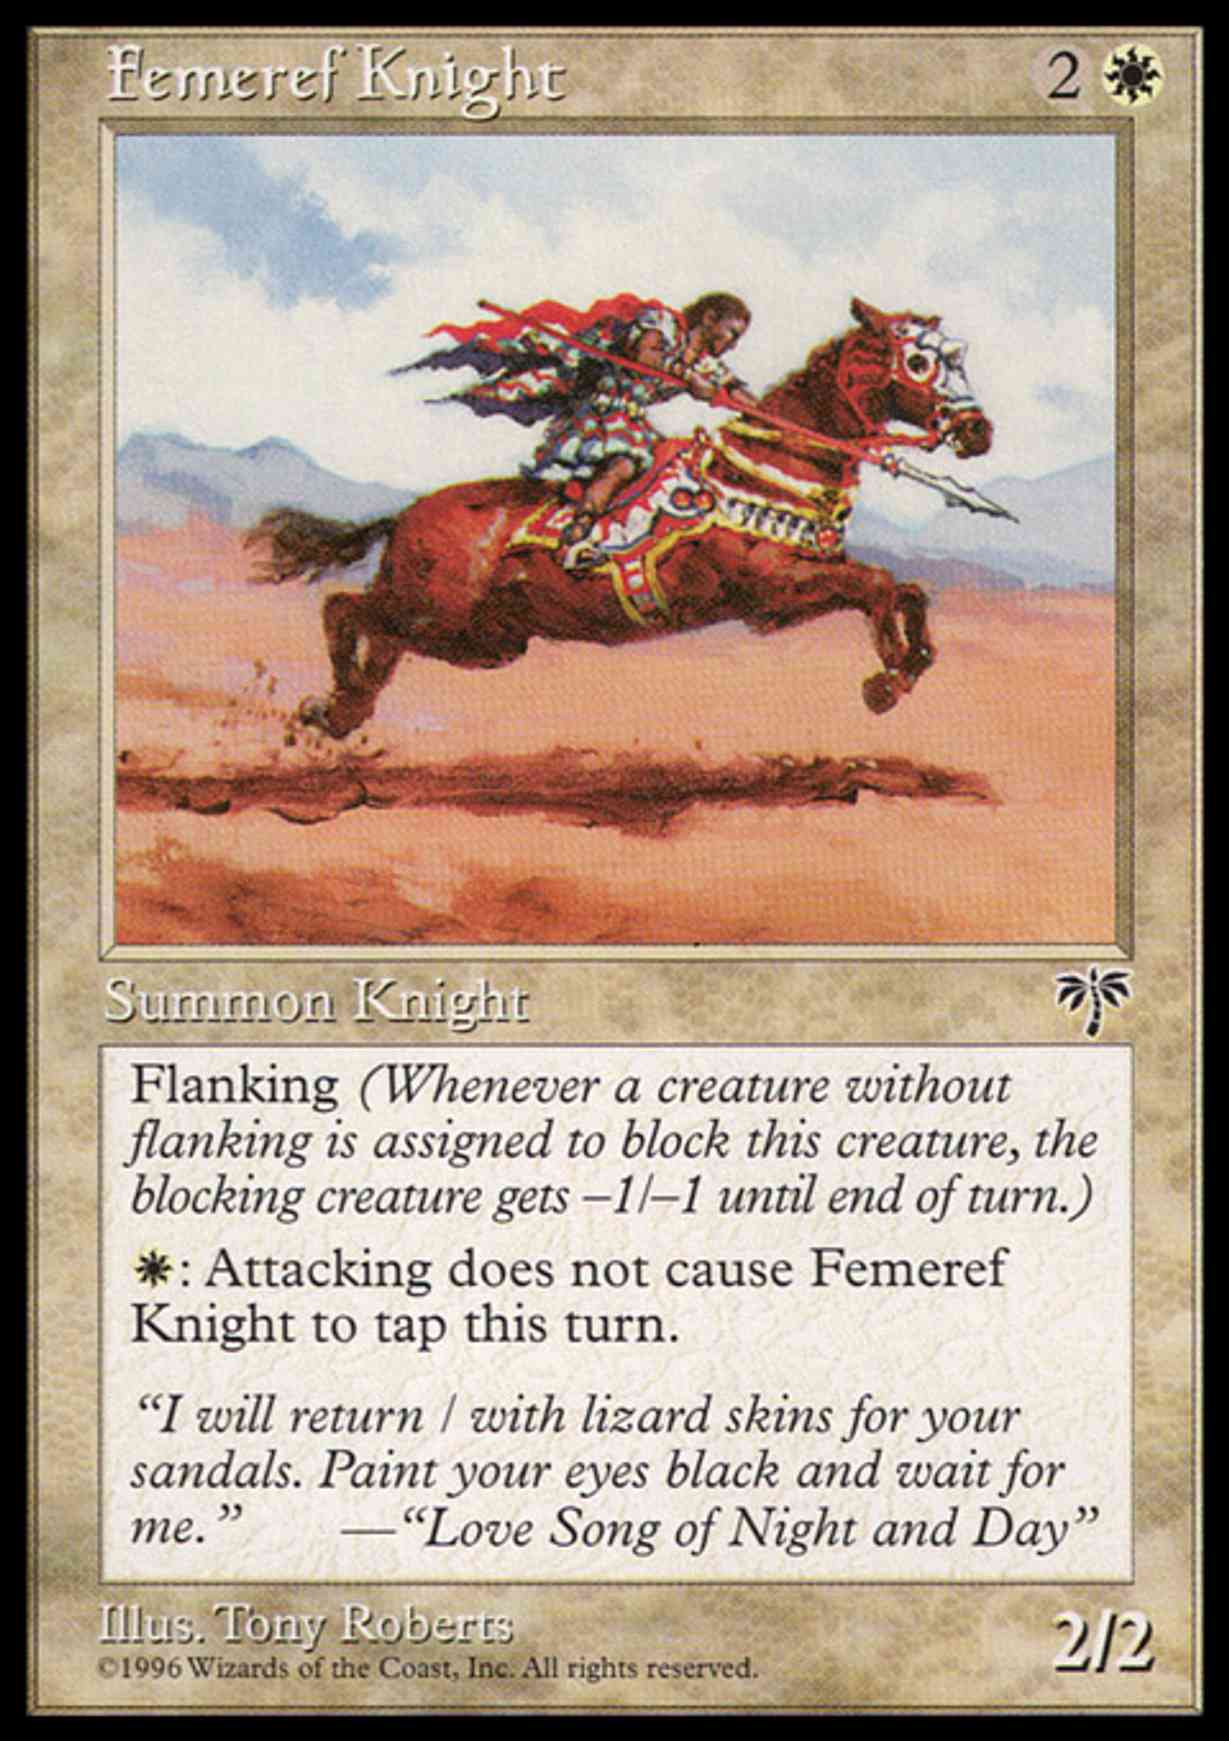 Femeref Knight magic card front